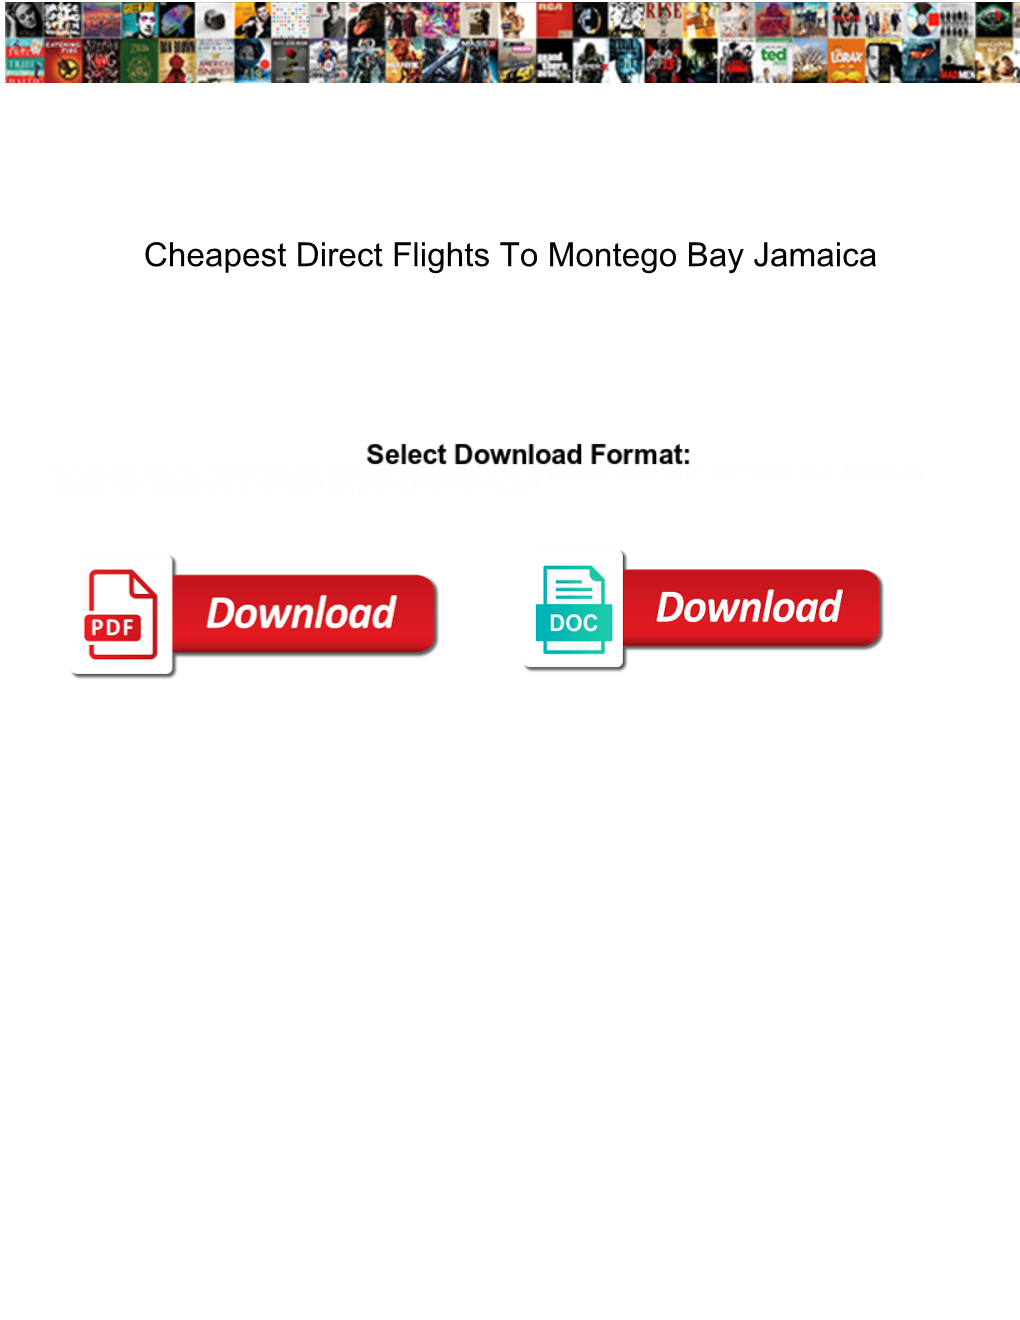 Cheapest Direct Flights to Montego Bay Jamaica